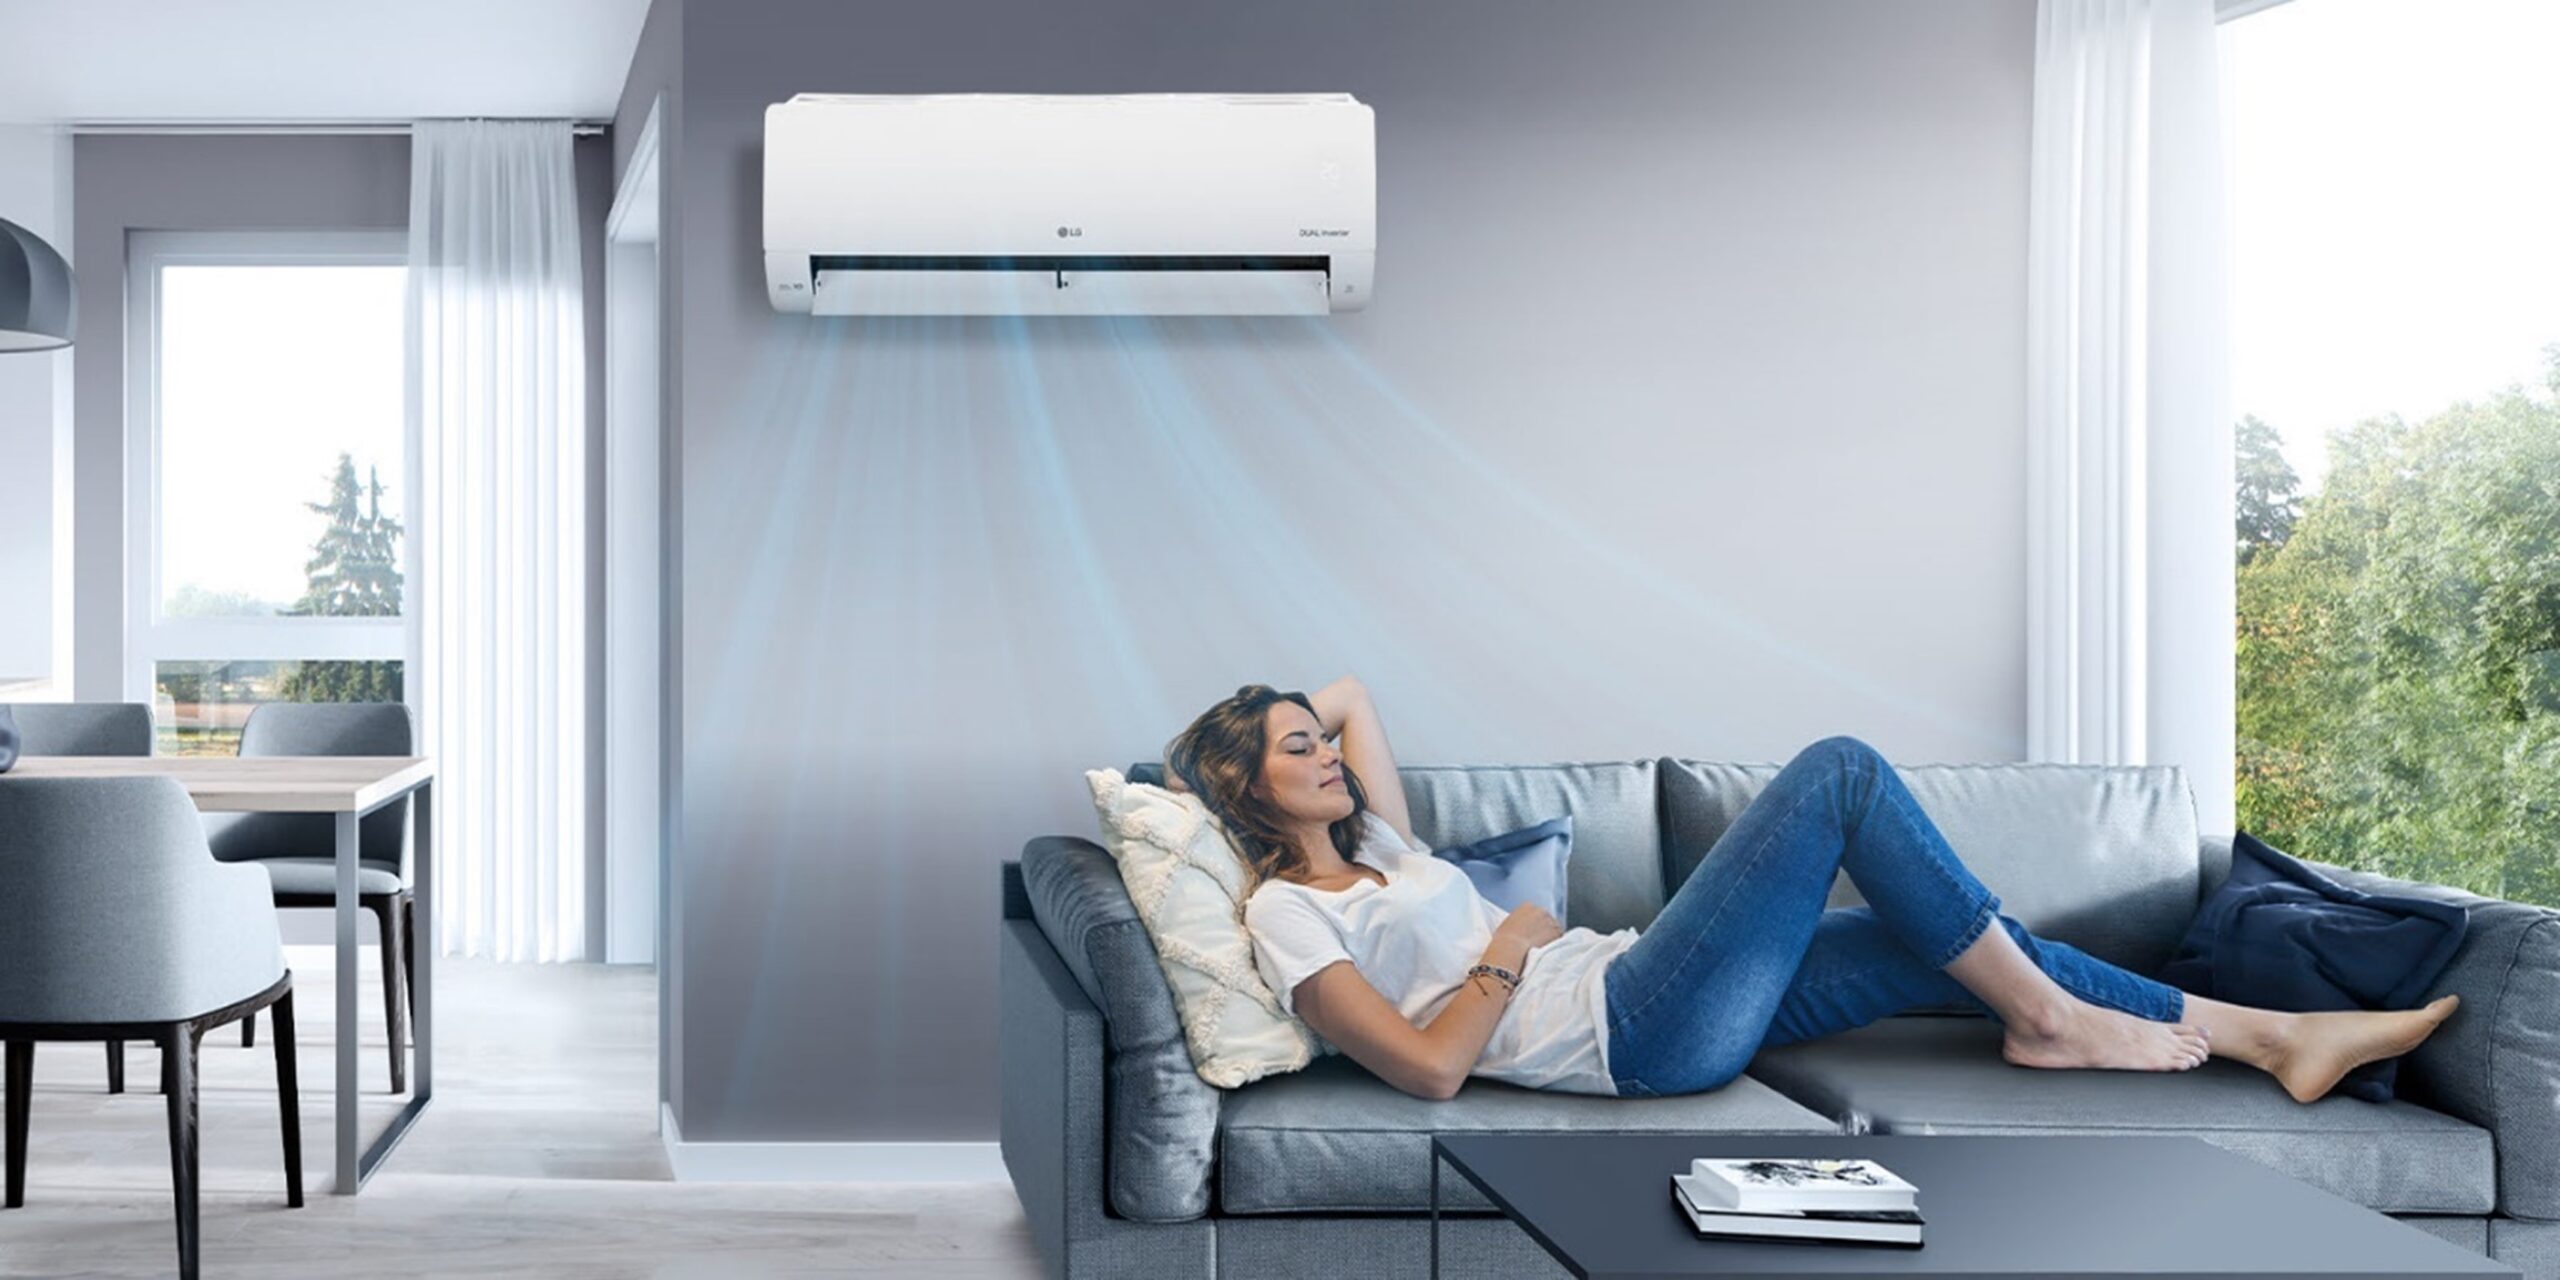 A woman lying on a couch under the LG air conditioner enjoying the cool air